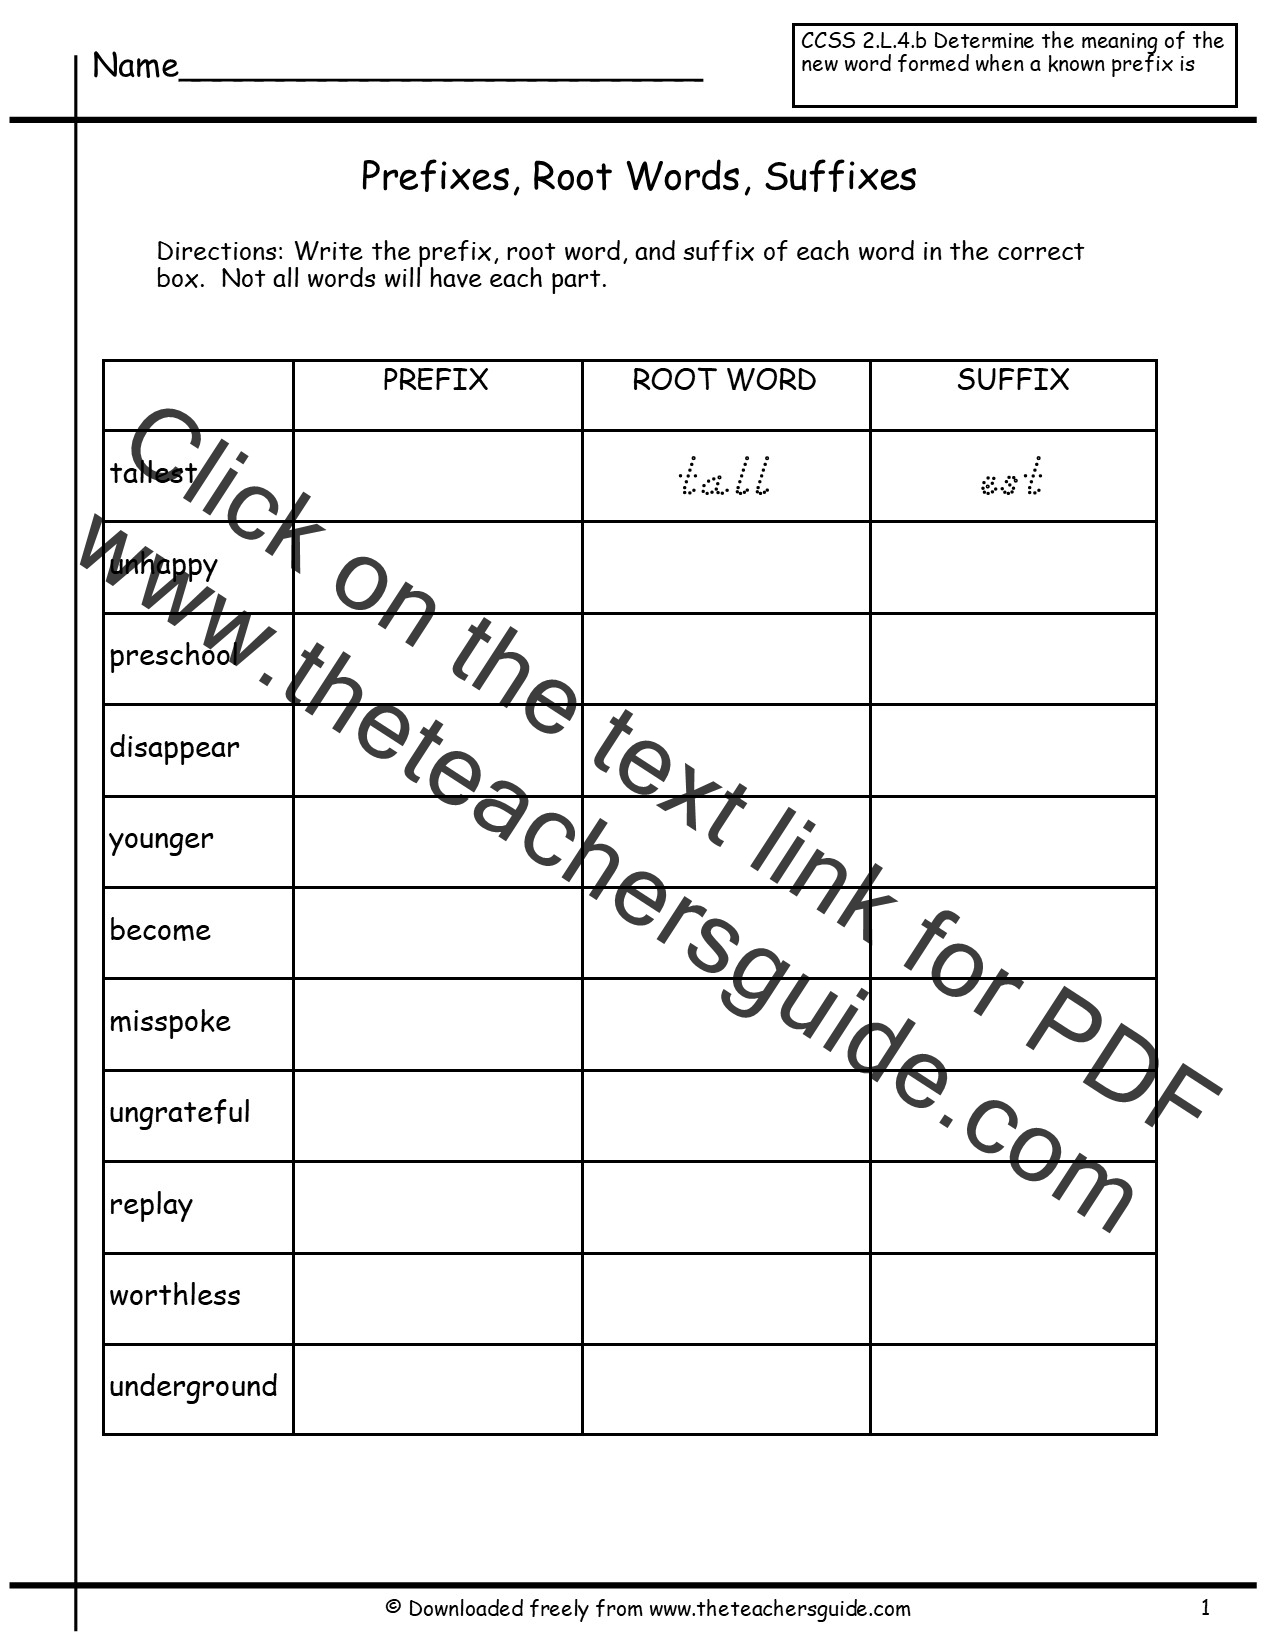 free-prefixes-and-suffixes-worksheets-from-the-teacher-s-guide